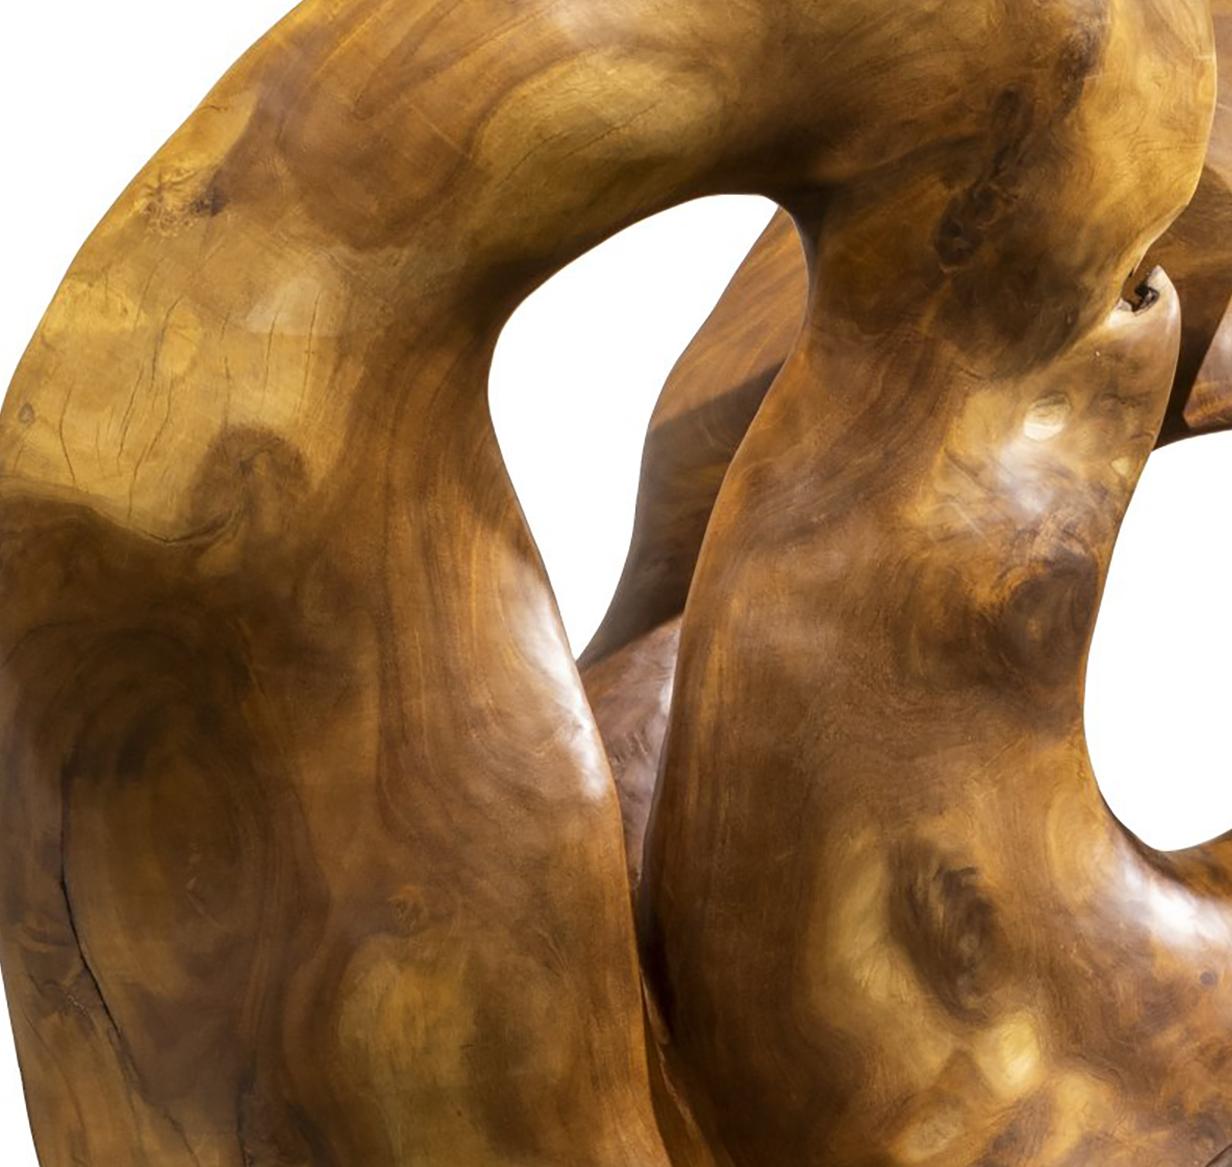 Abrazo - 21st Century, Contemporary, Abstract Sculpture, Mahogany Root, Wood 2